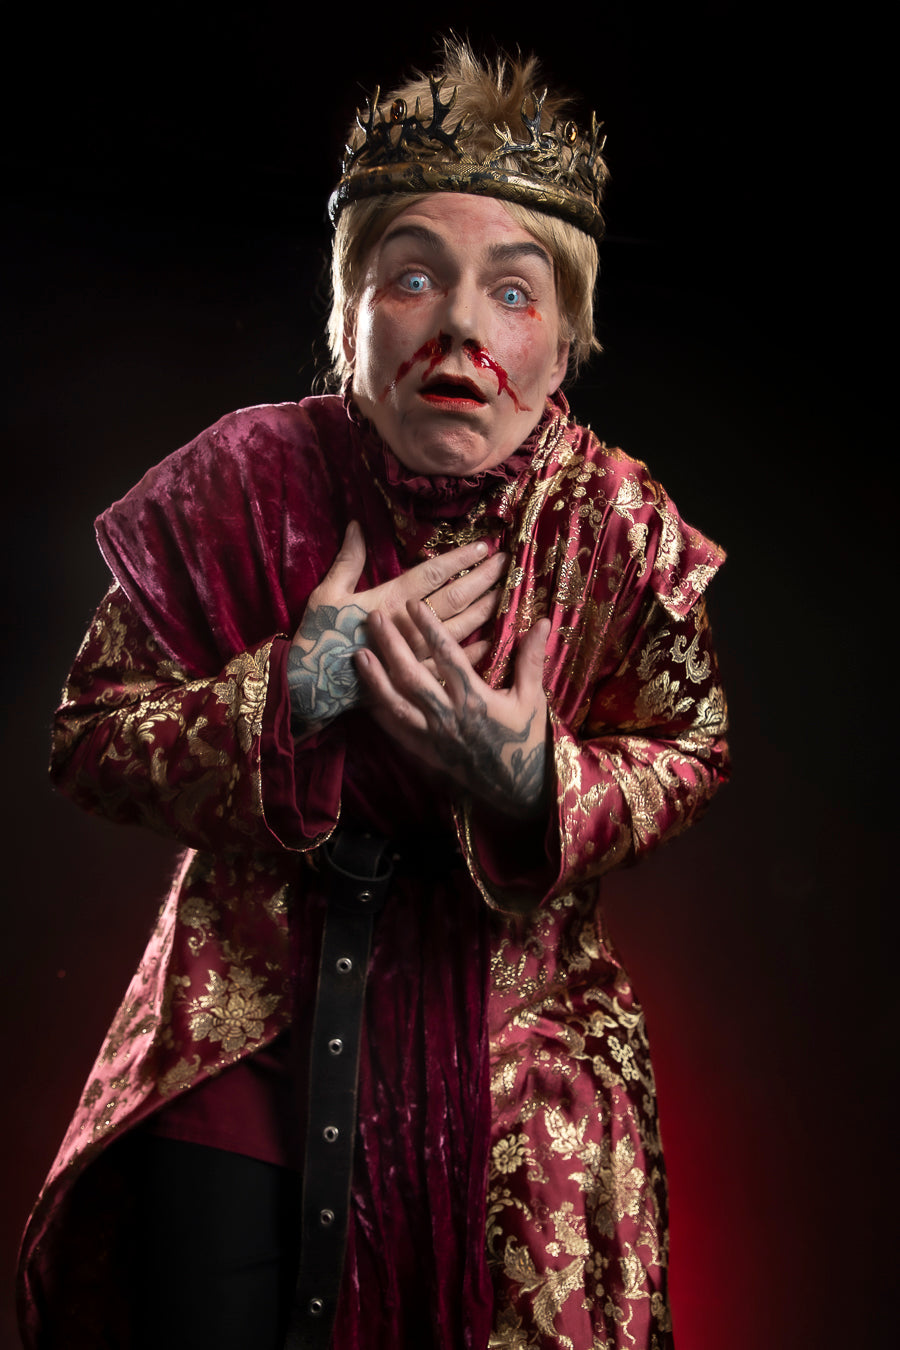 Game of Thrones Joffrey Baratheon Costume Hire or Cosplay, plus Makeup, Contact Lenses and Photography. Proudly by and available at, Little Shop of Horrors Costumery Mornington & Melbourne